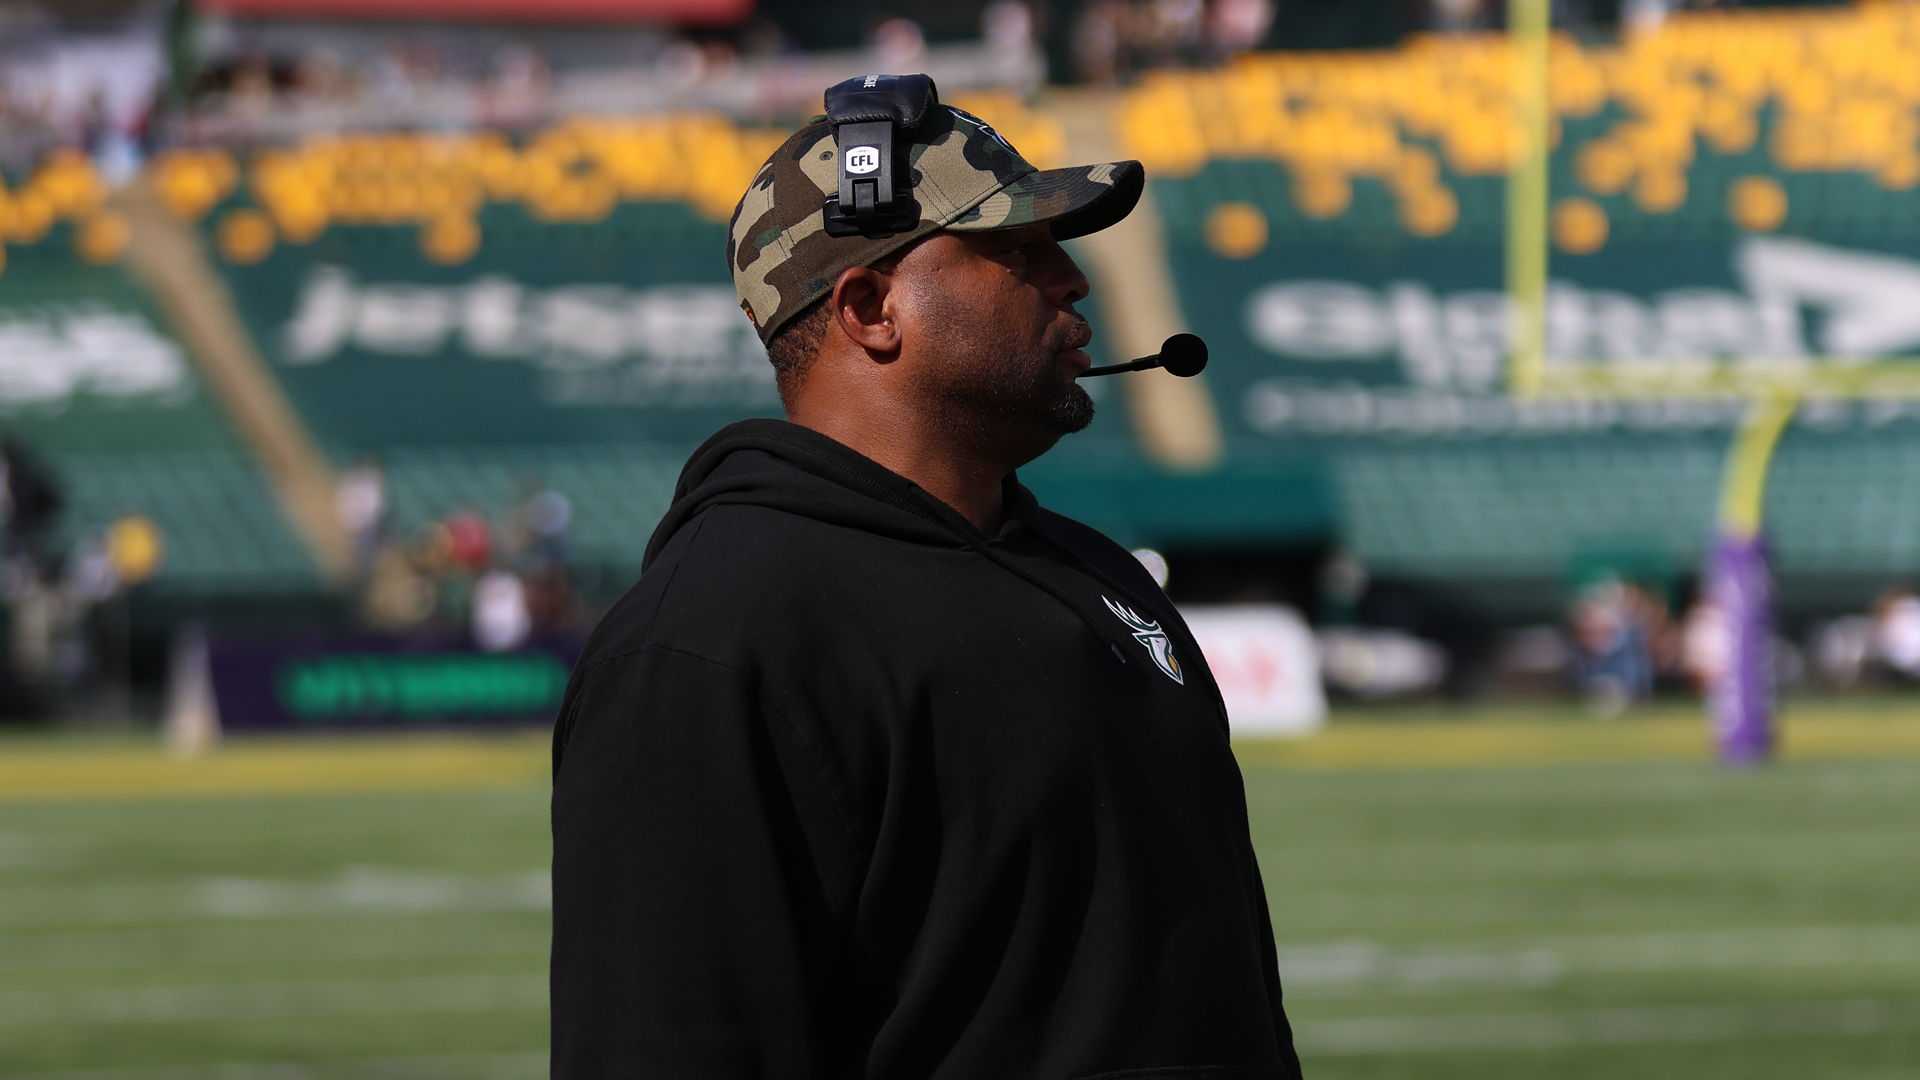 Jarious Jackson takes over as Edmonton Elks offensive coordinator. It marks the third time in Jackson's CFL coaching career that he will handle offensive coordinator duties after holding both roles with the Toronto Argonauts (2021) and B.C. Lions (2018-19).